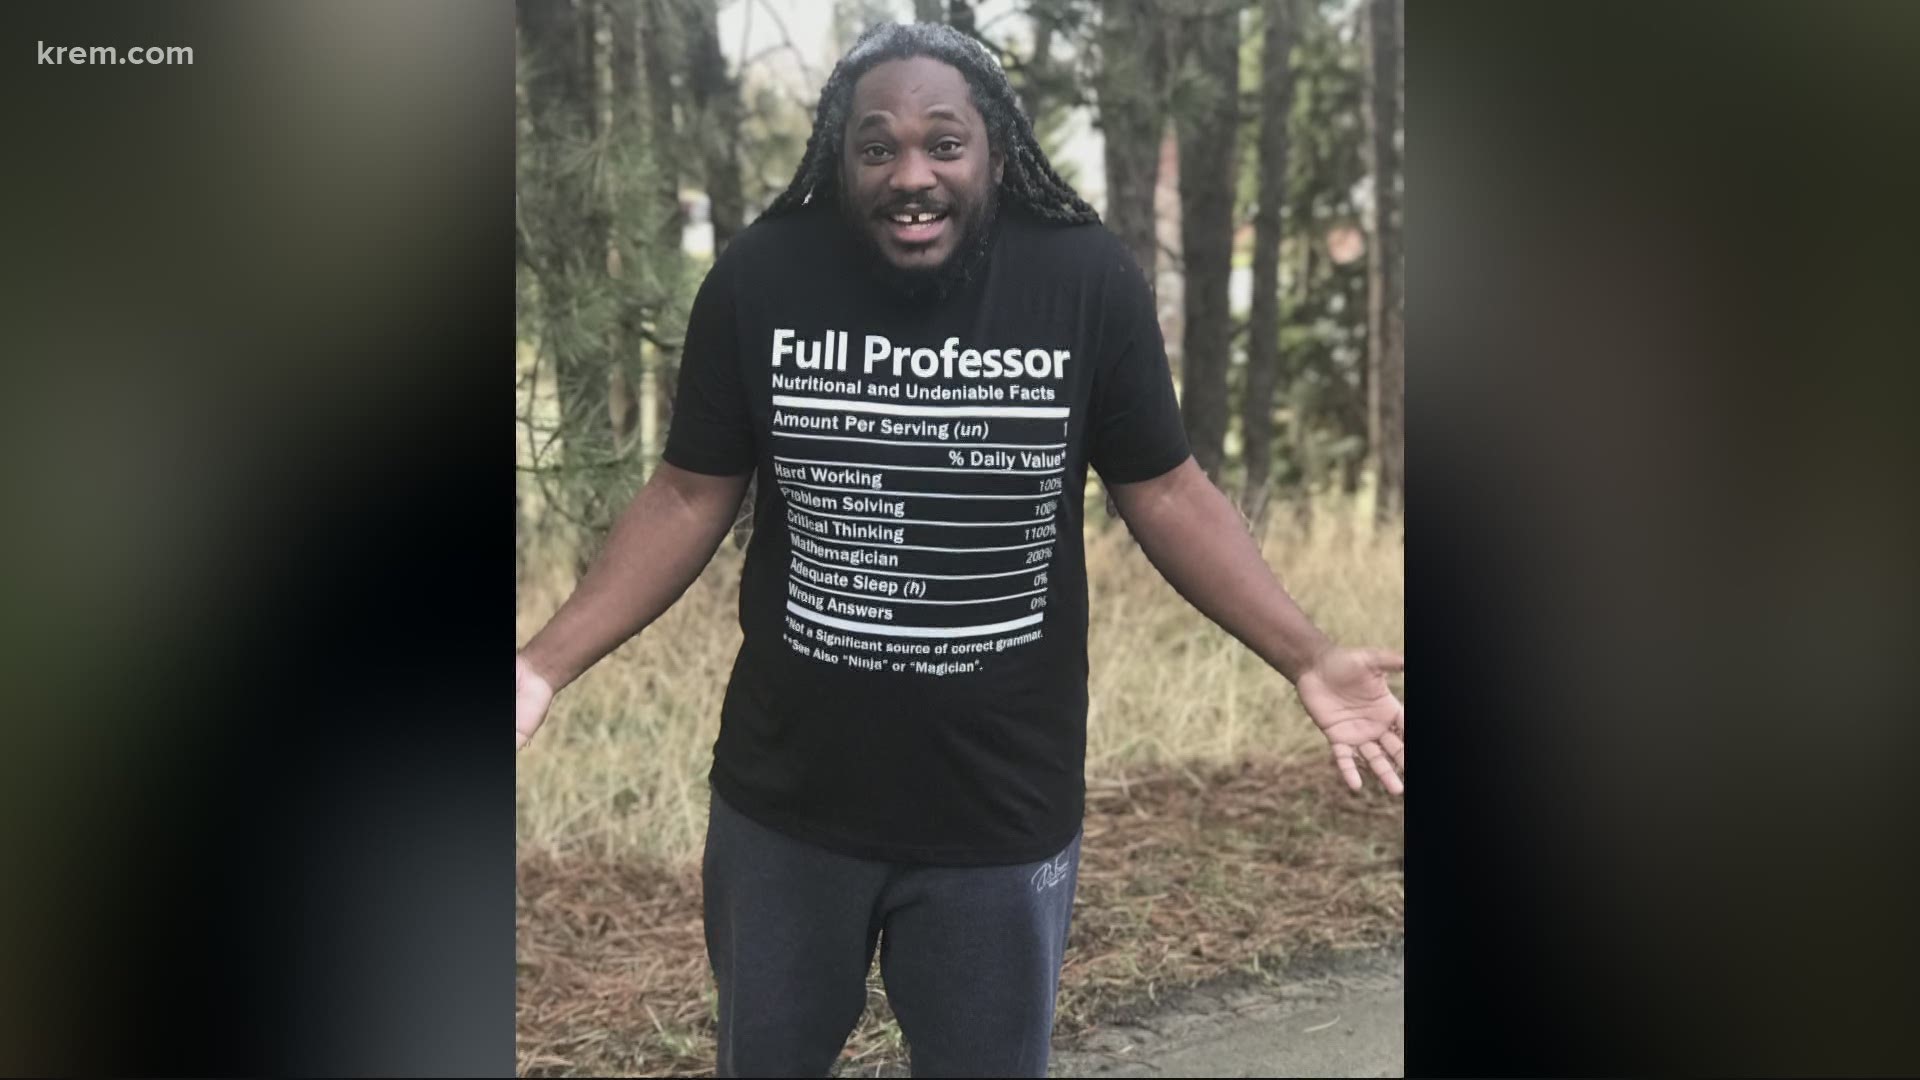 Dr. Sydney Freeman, Jr. became a full professor in about half the time it usually takes. He posted about the accomplishment on social media and it went viral.